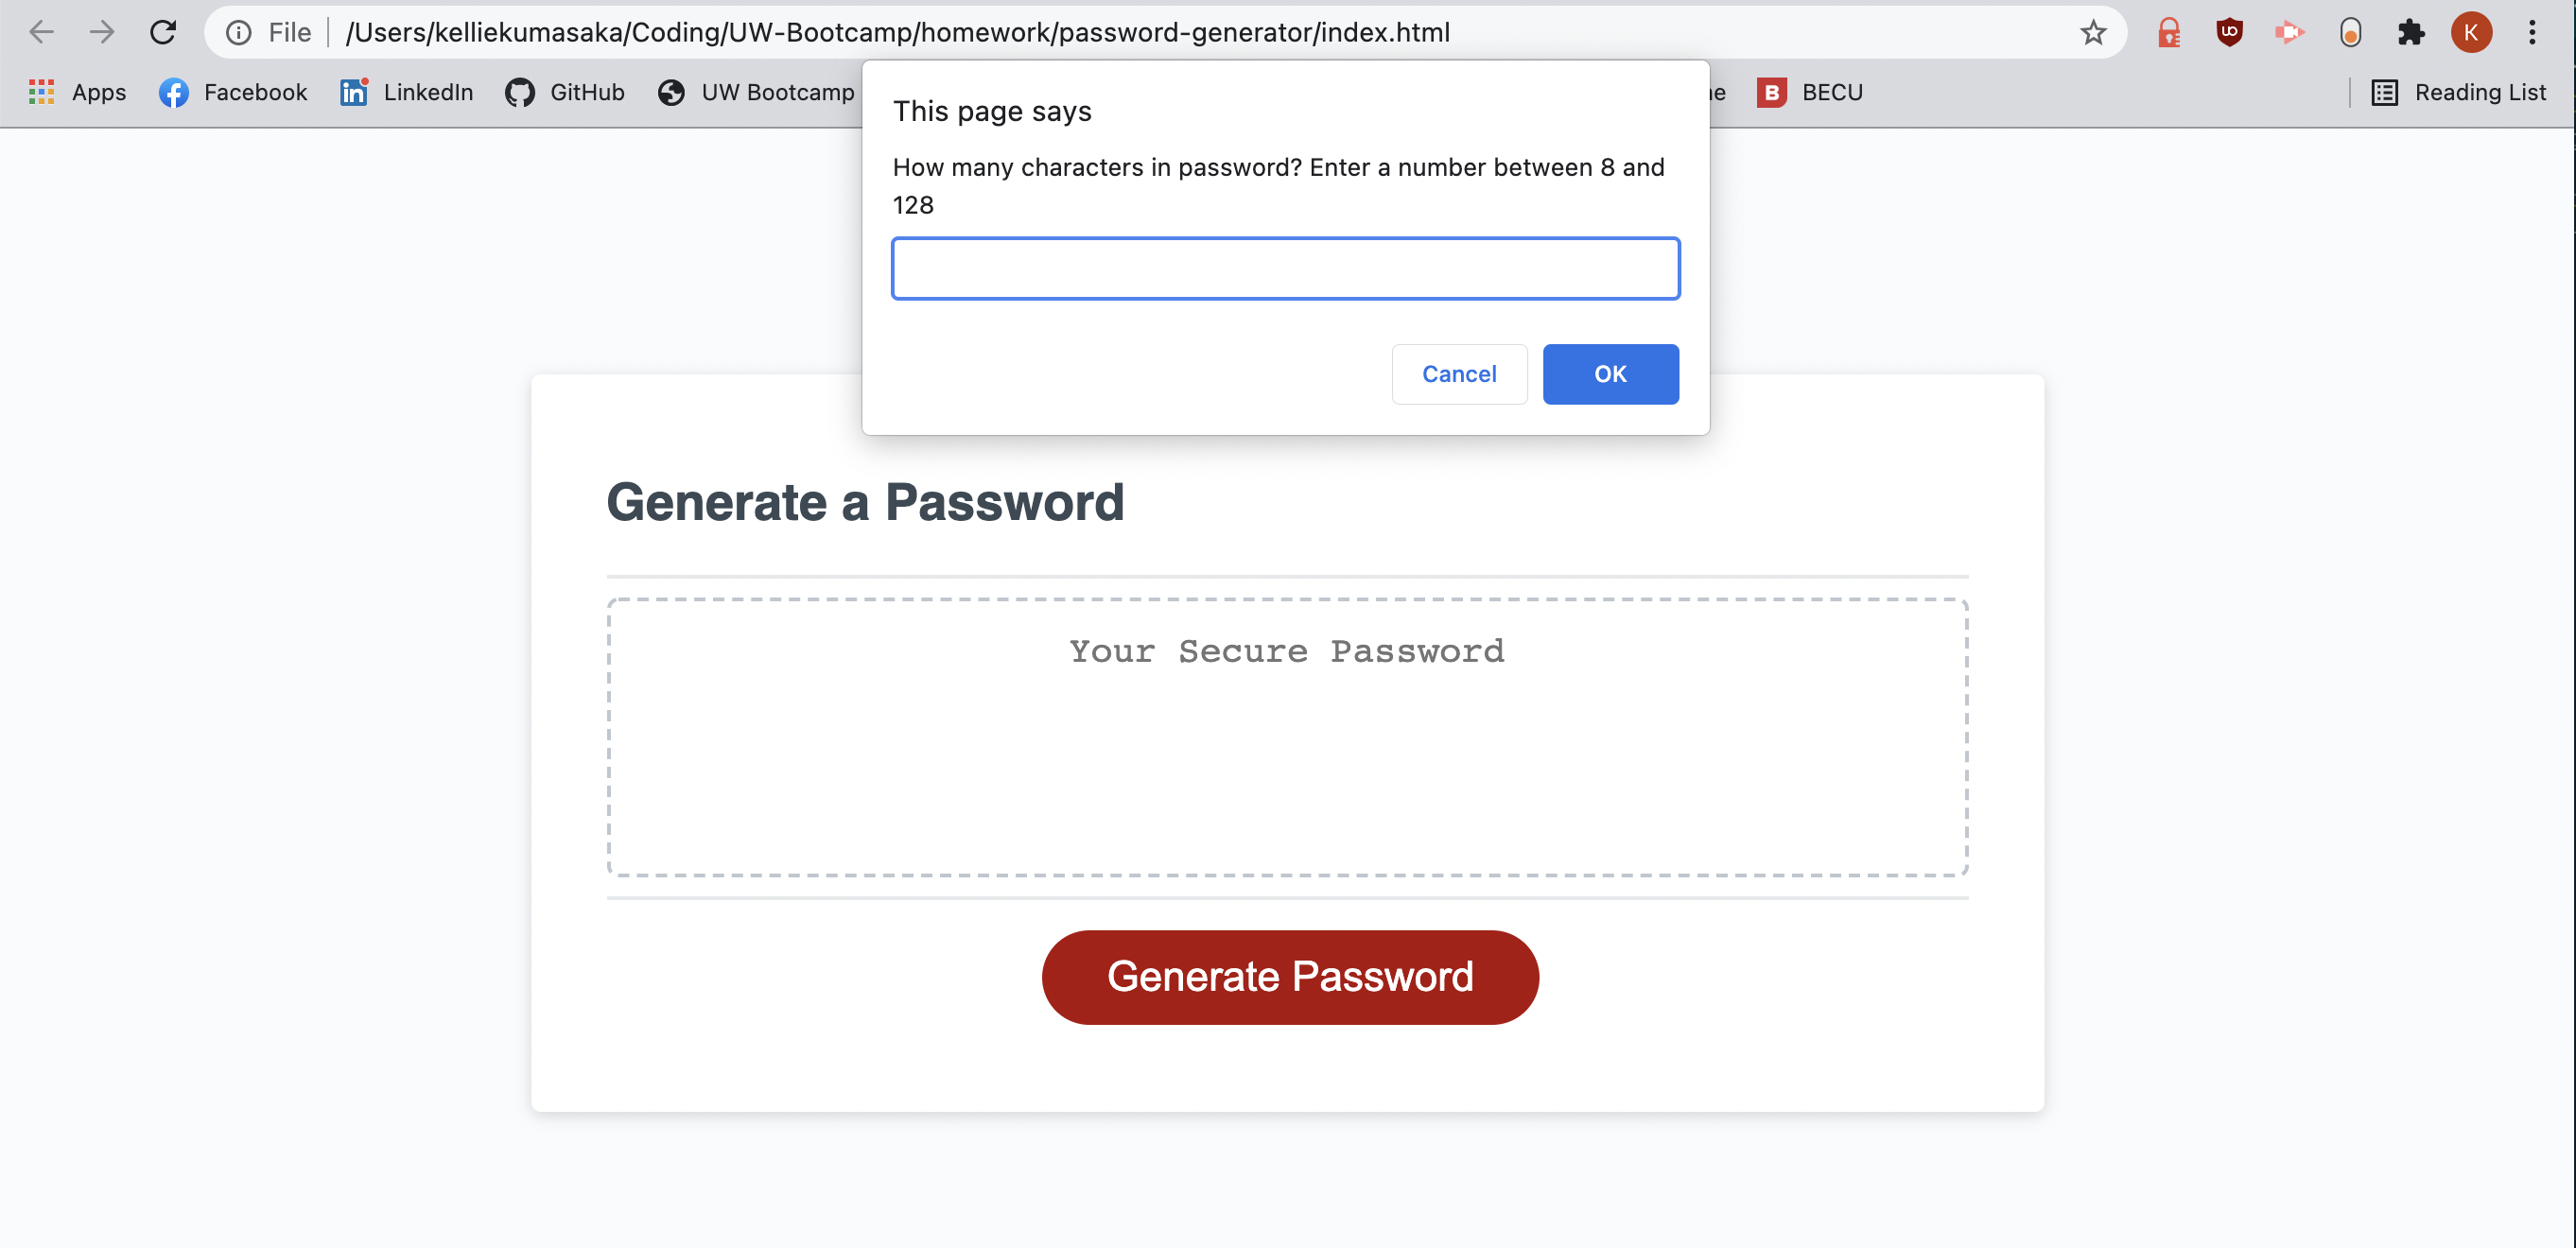 Password generator window with the question "How many characters in password? Enter a number between 8 and 128"